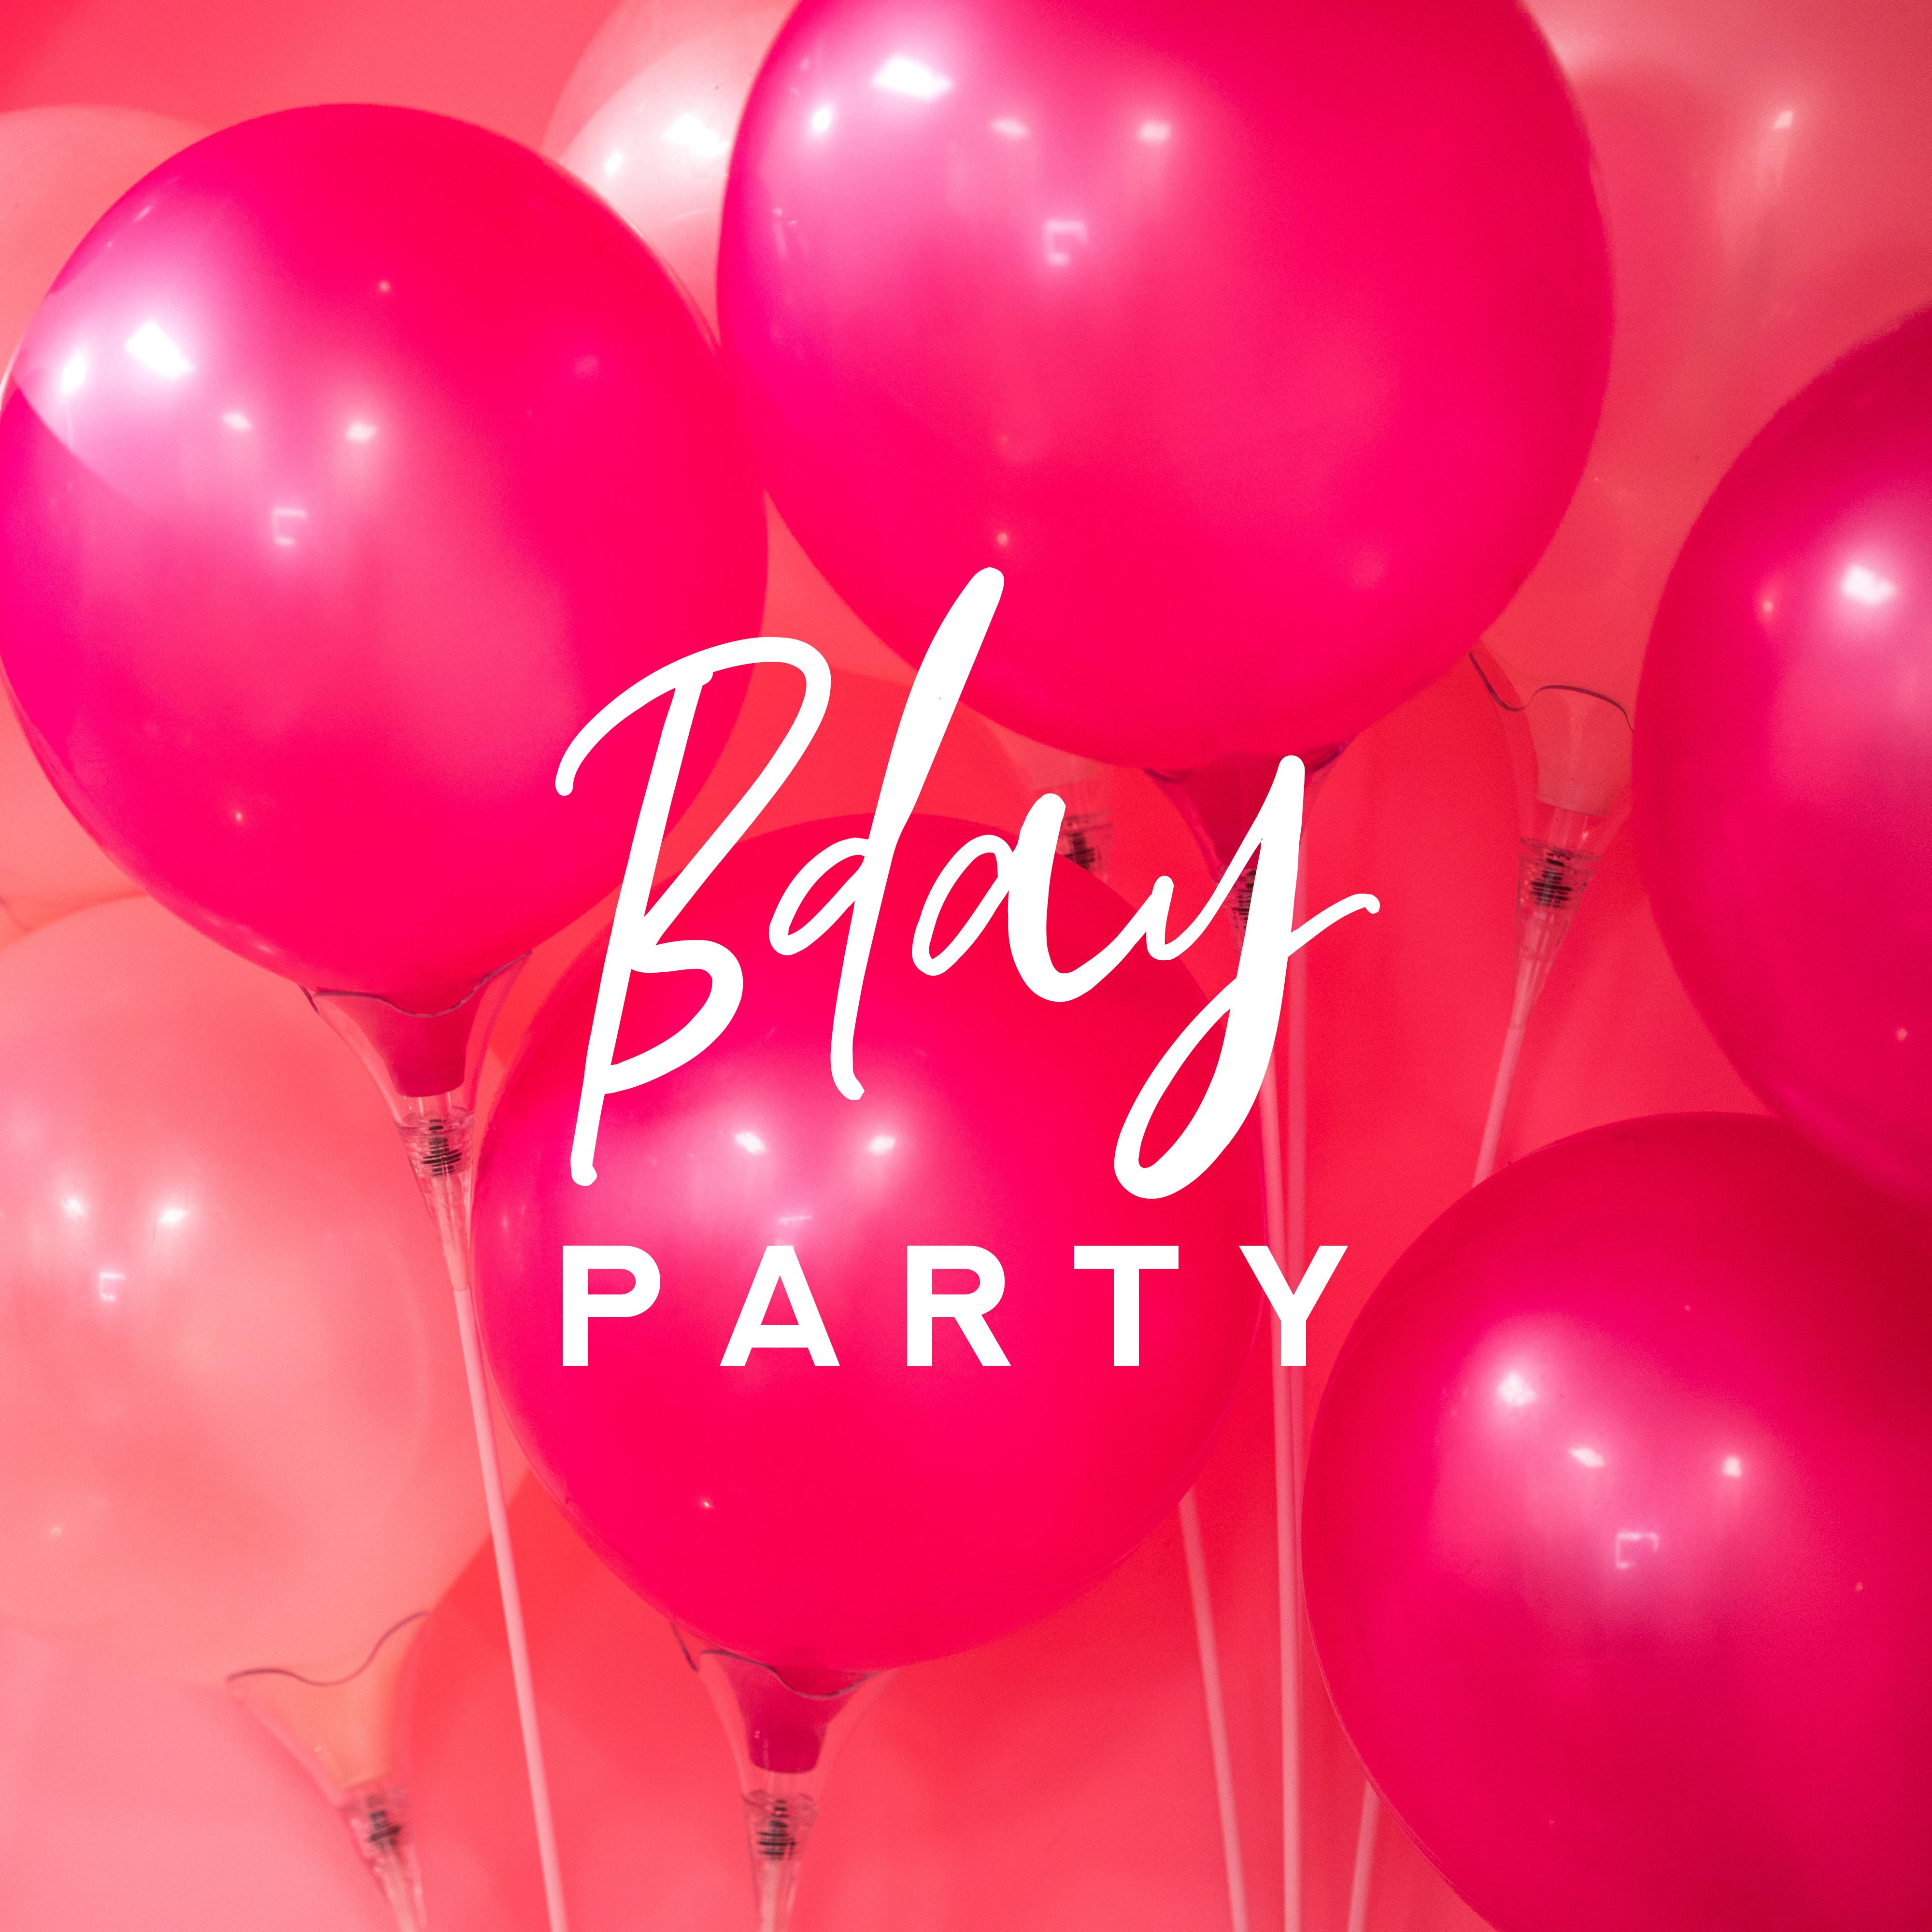 Bday Party: Chillout Background Music to Celebrate, Party for Friends, Birthday Madness, Music for Dancing, Partying at Home